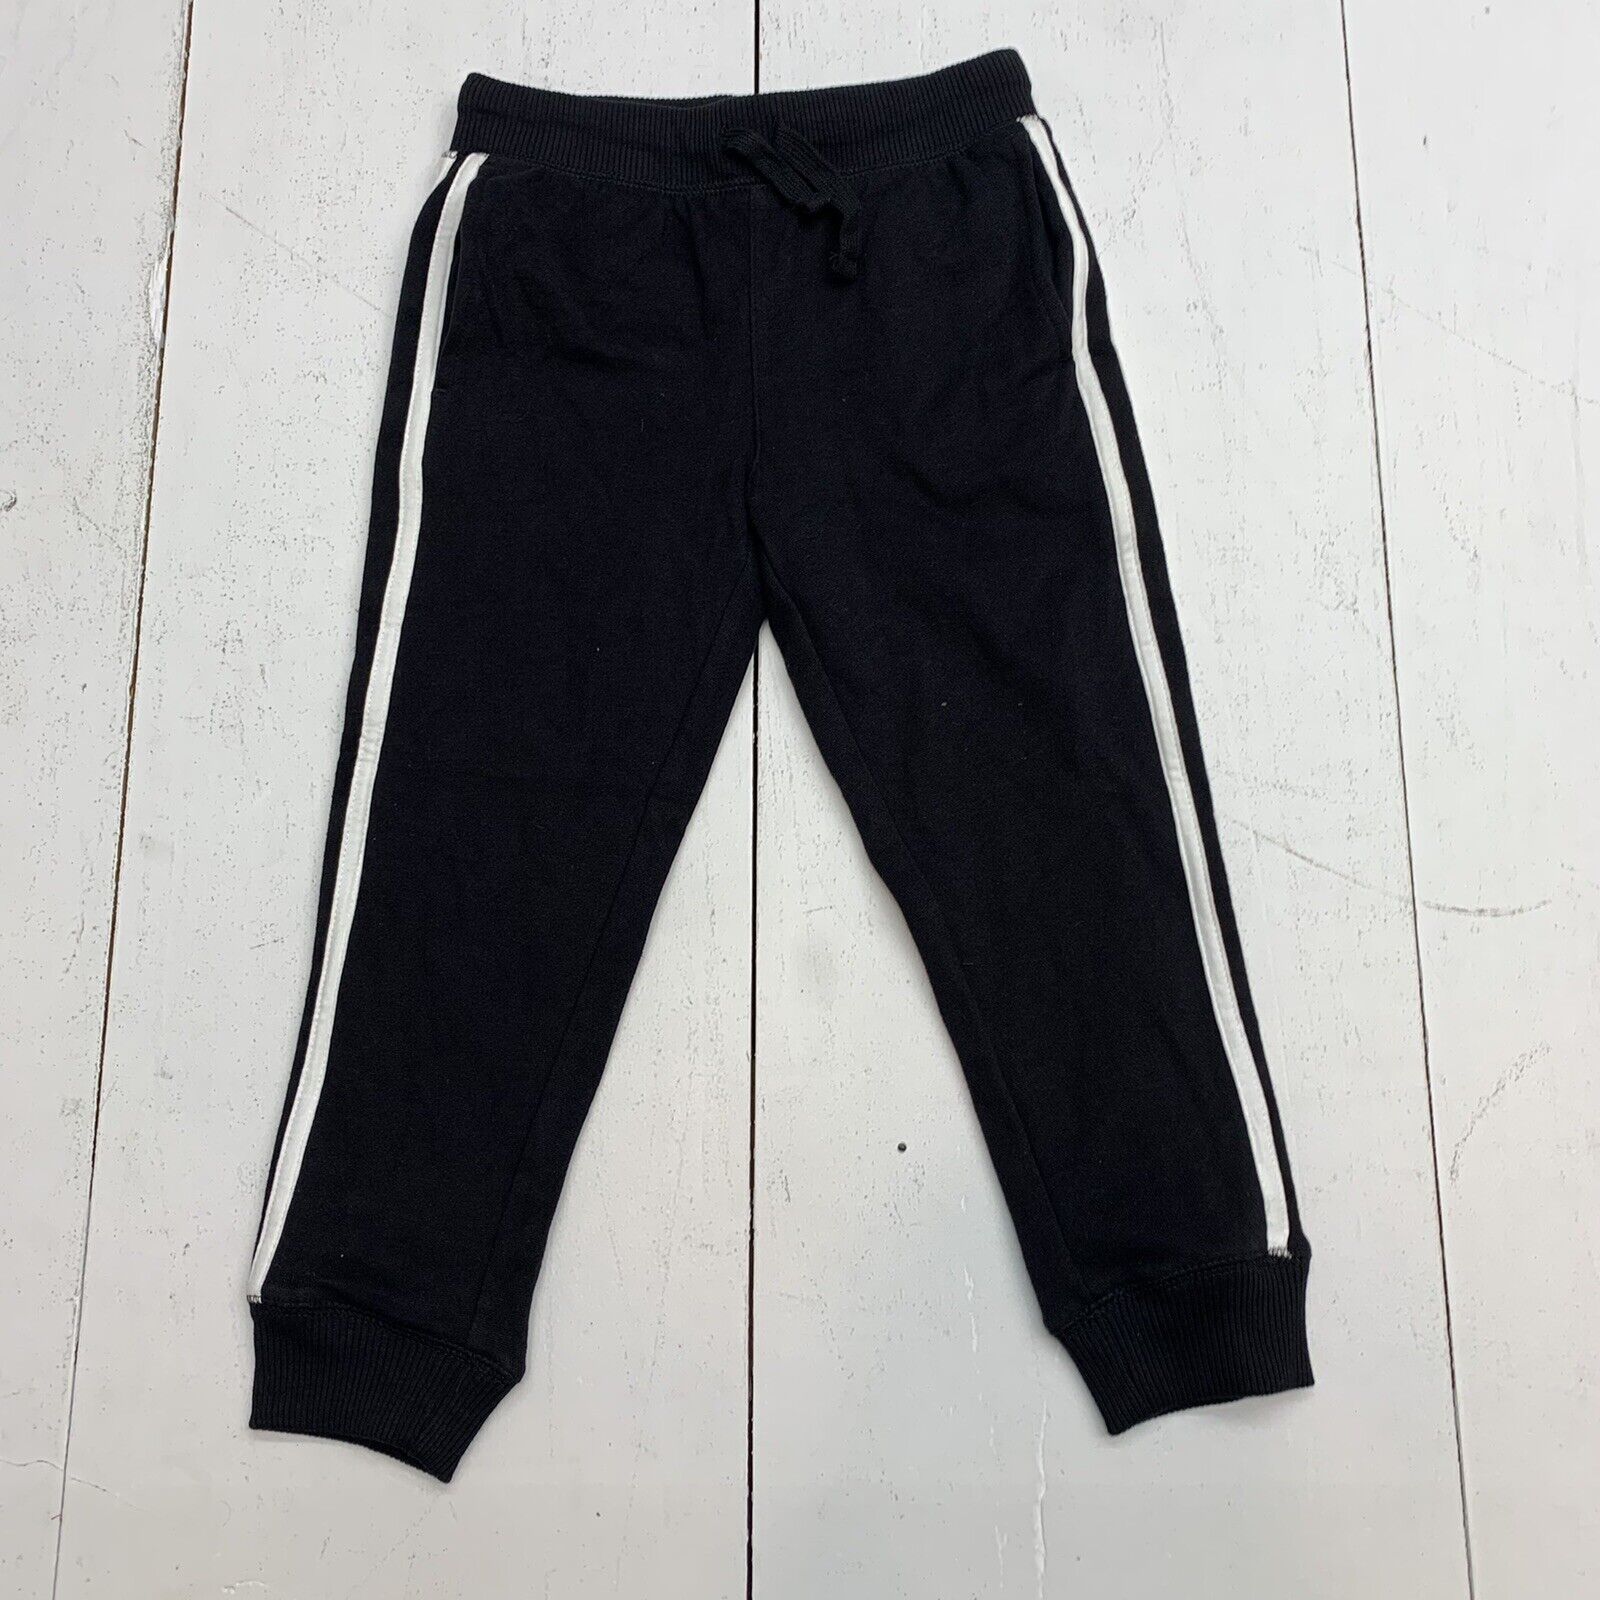 The Childrens Place Kids Black sweatpants Size Small - beyond exchange